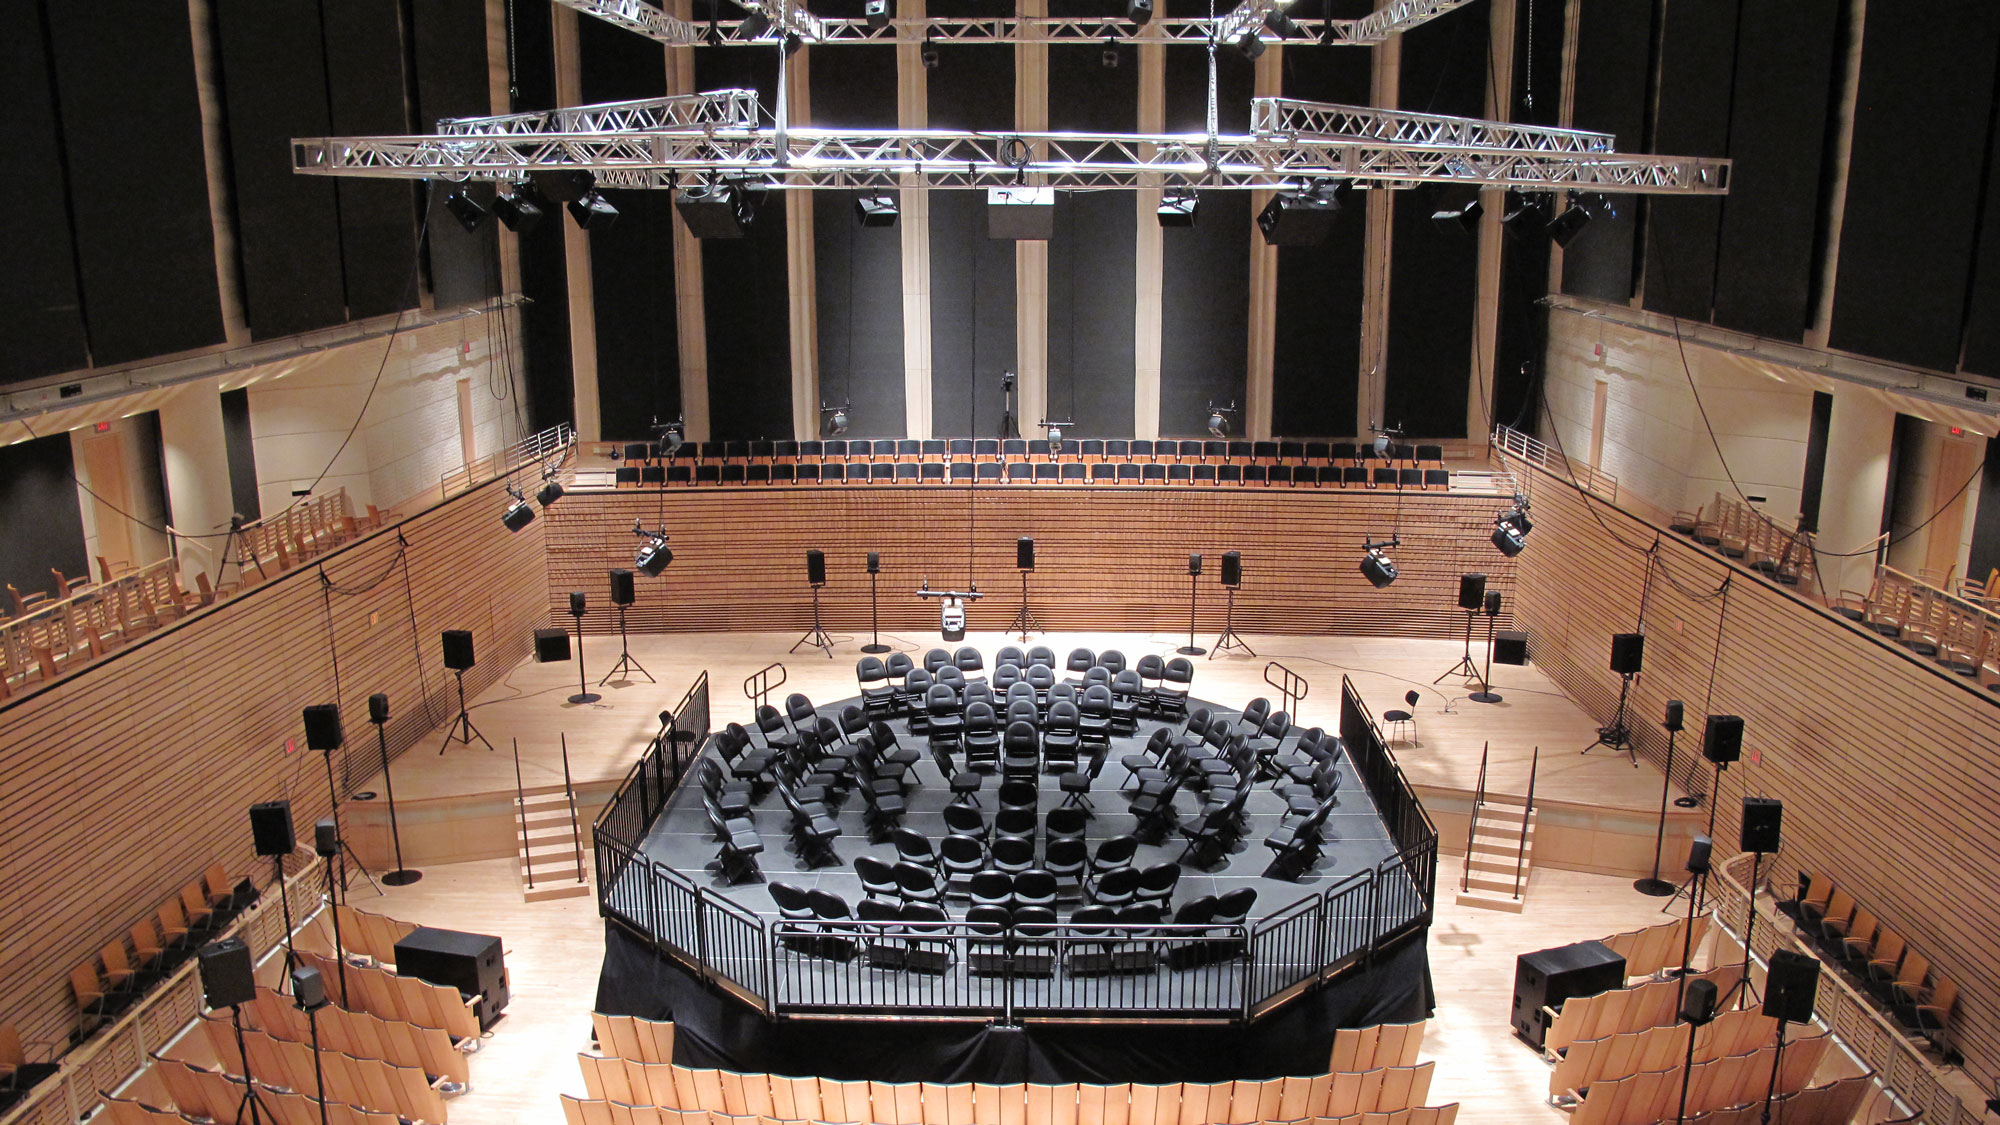 Black folding chairs arranged in a multi ring circle on a constructed black stage in the concert hall orchestra pit. 